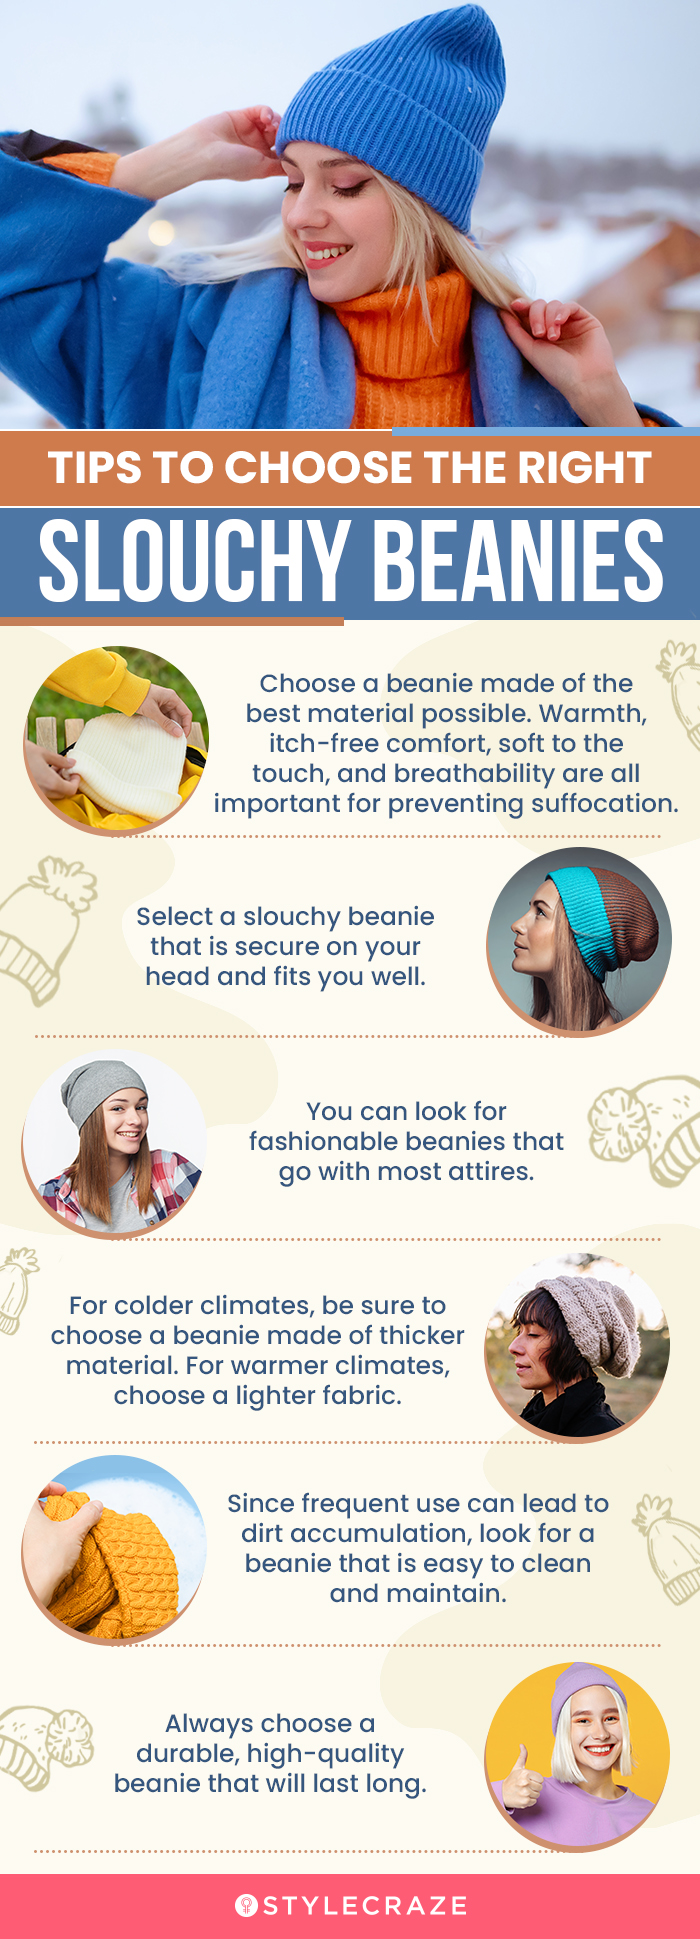 Tips To Choose The Right Slouchy Beanies (infographic)